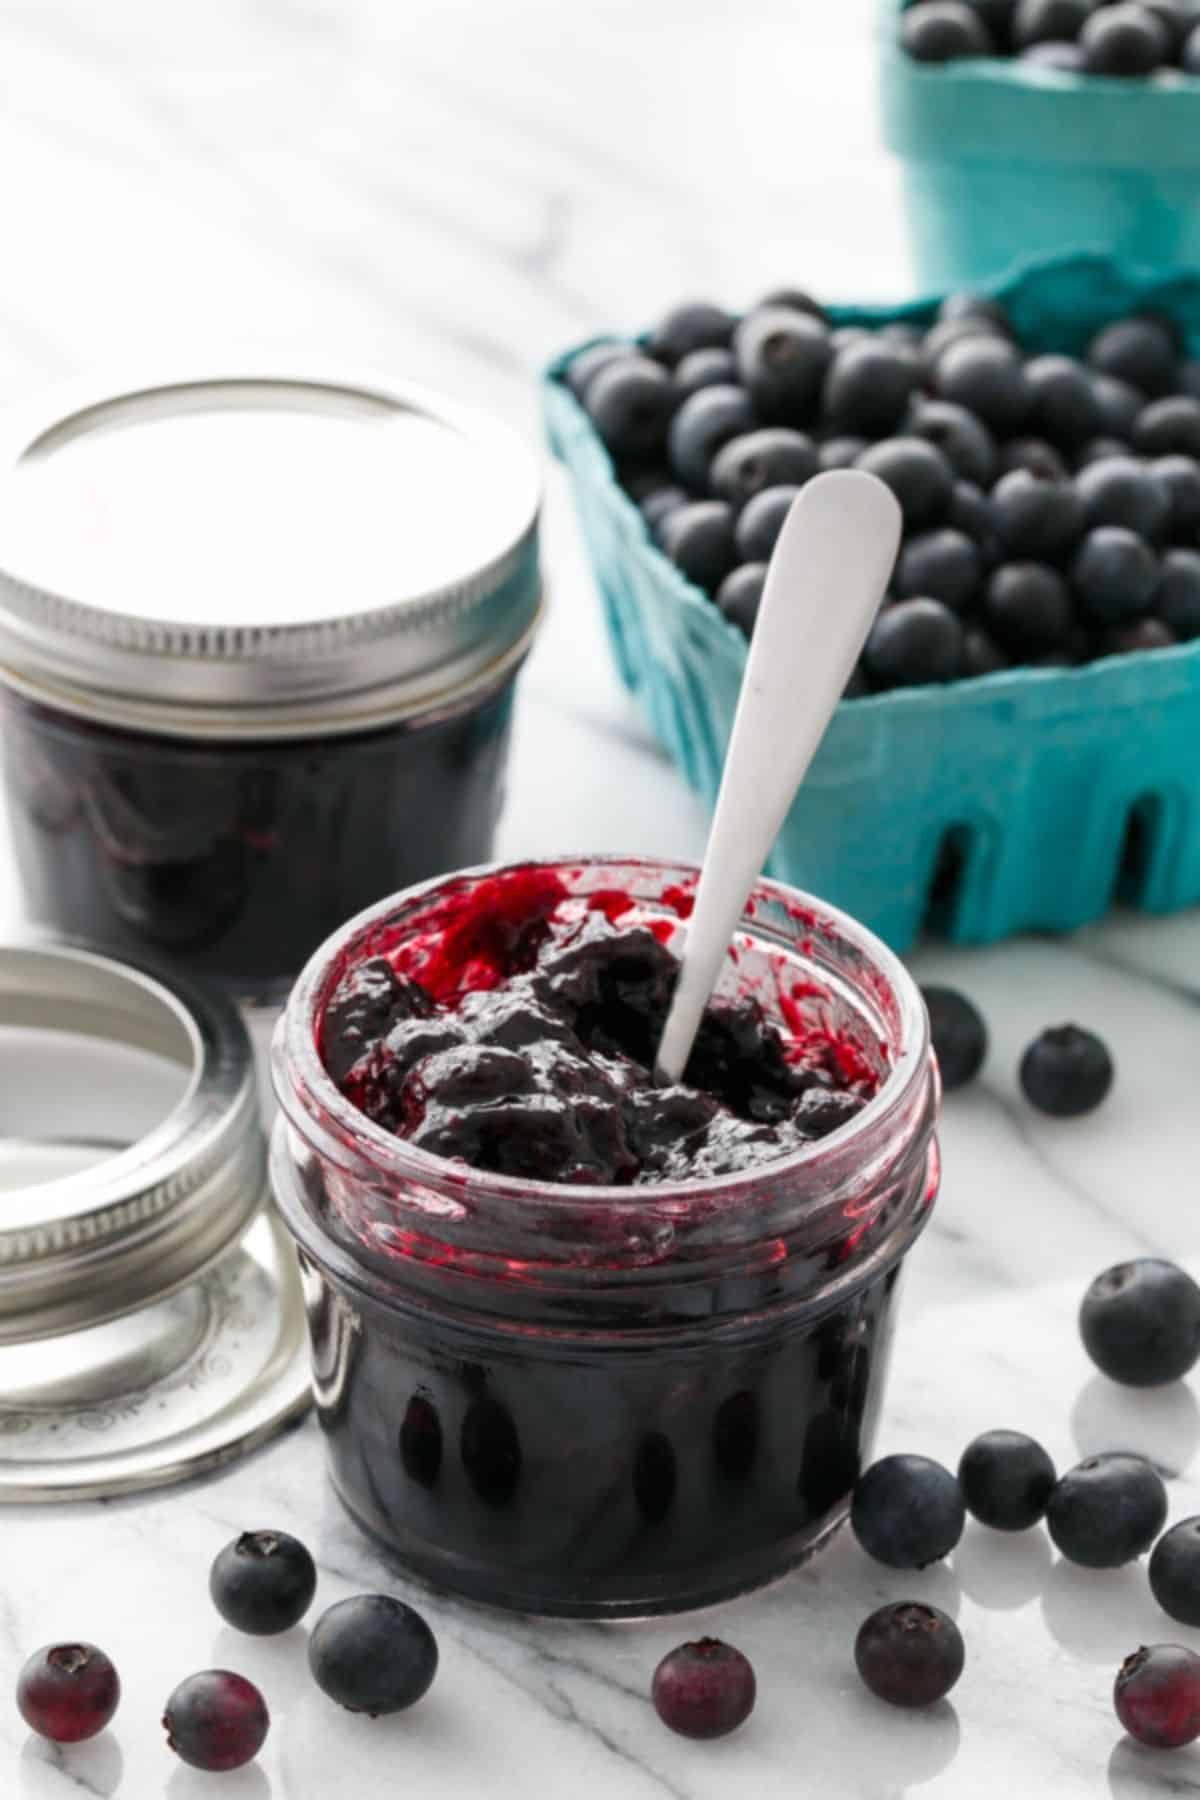 Blueberry vanilla jam in a glass jar with a spoon.